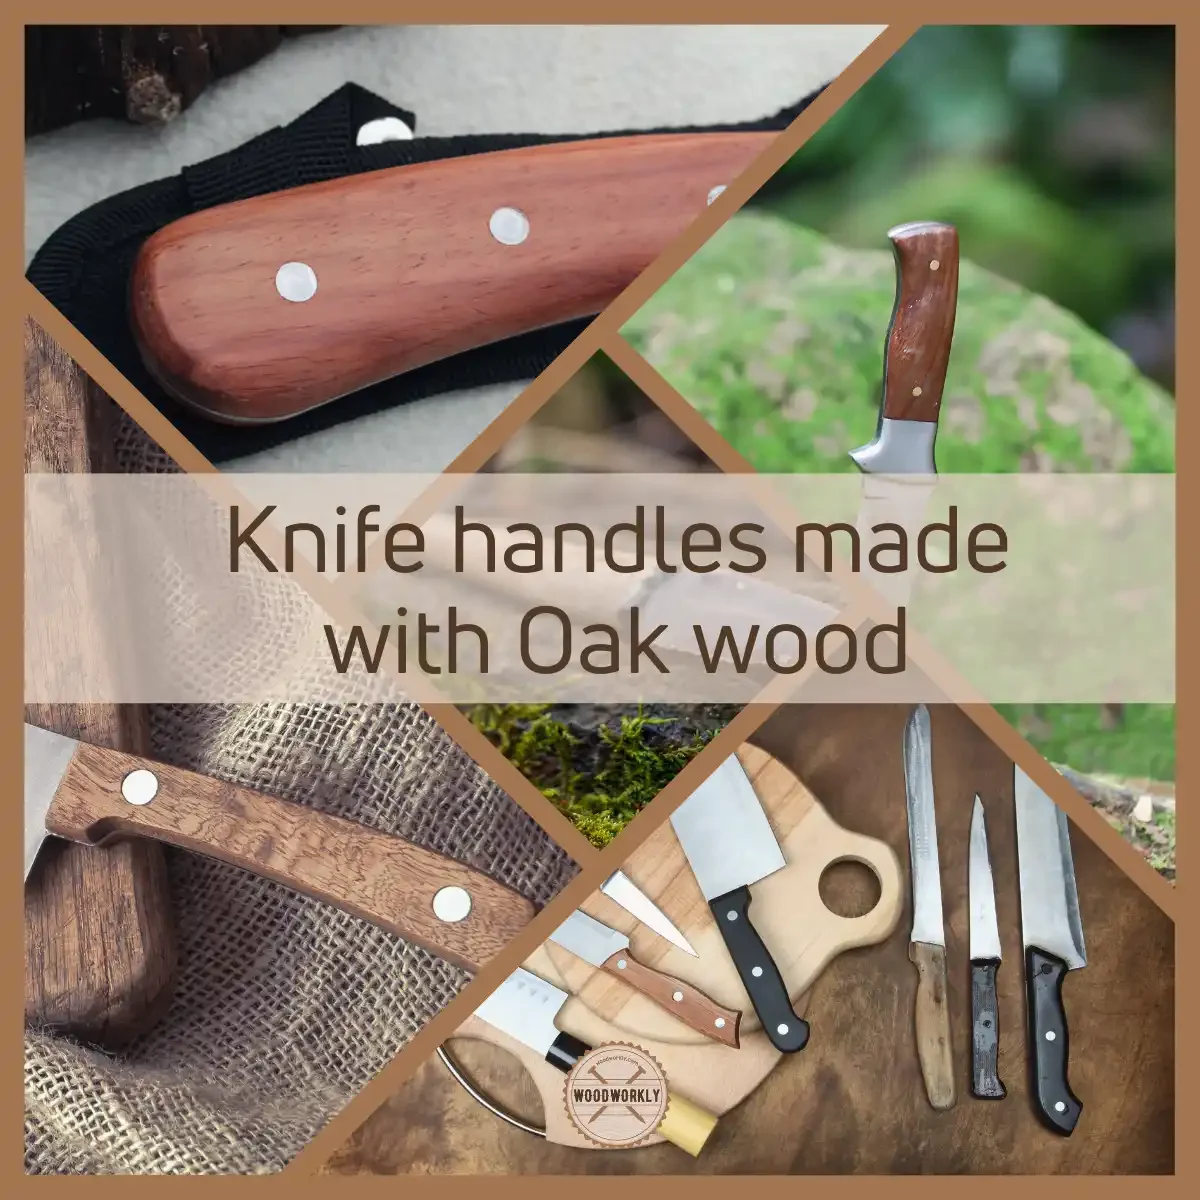 Knife handles made with Oak wood